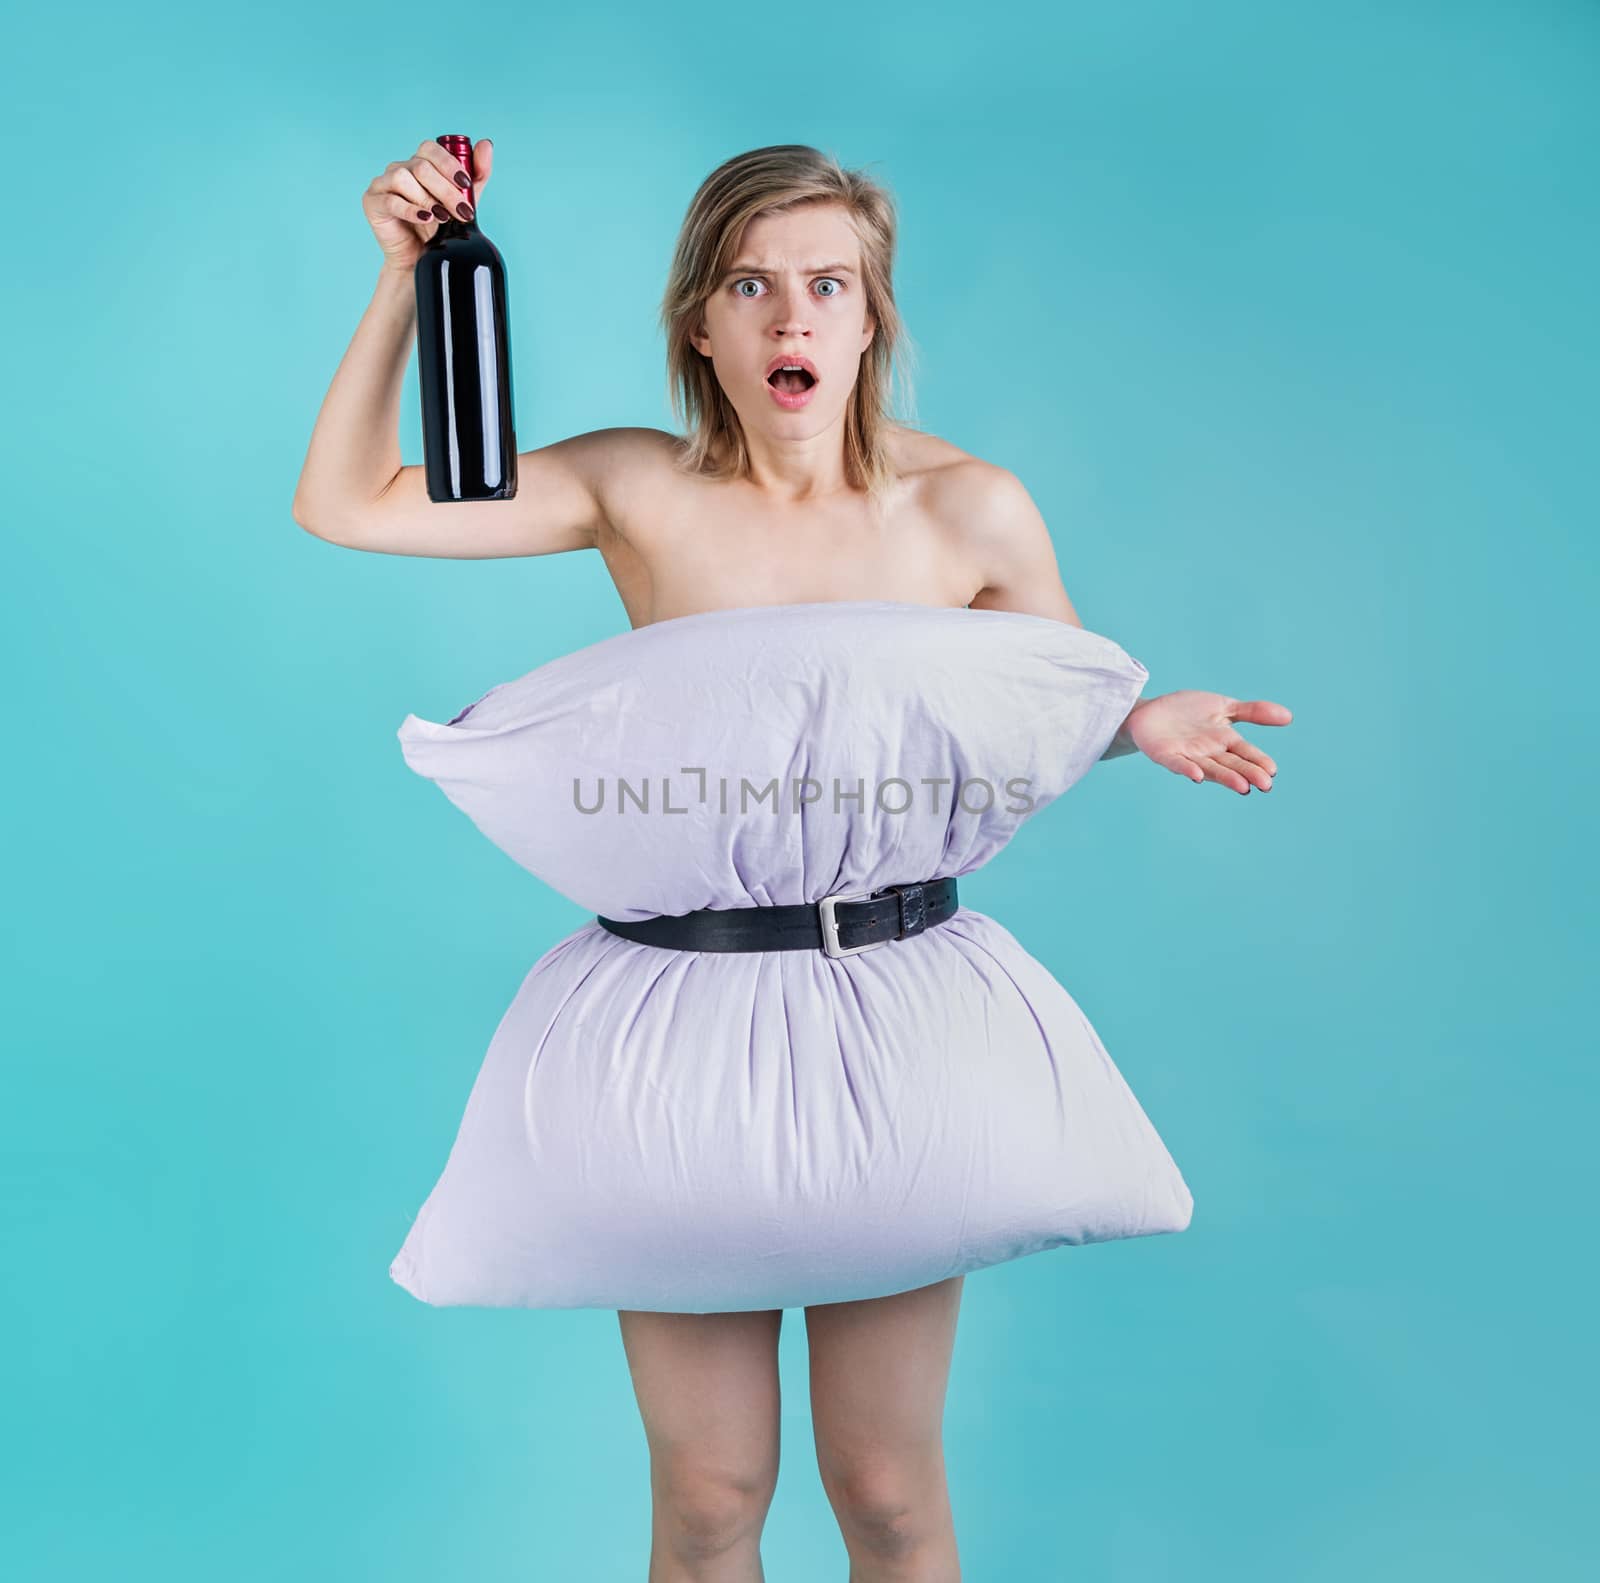 Angry and surprised woman in pillowdress holding a wine bottle isolated on blue background by Desperada